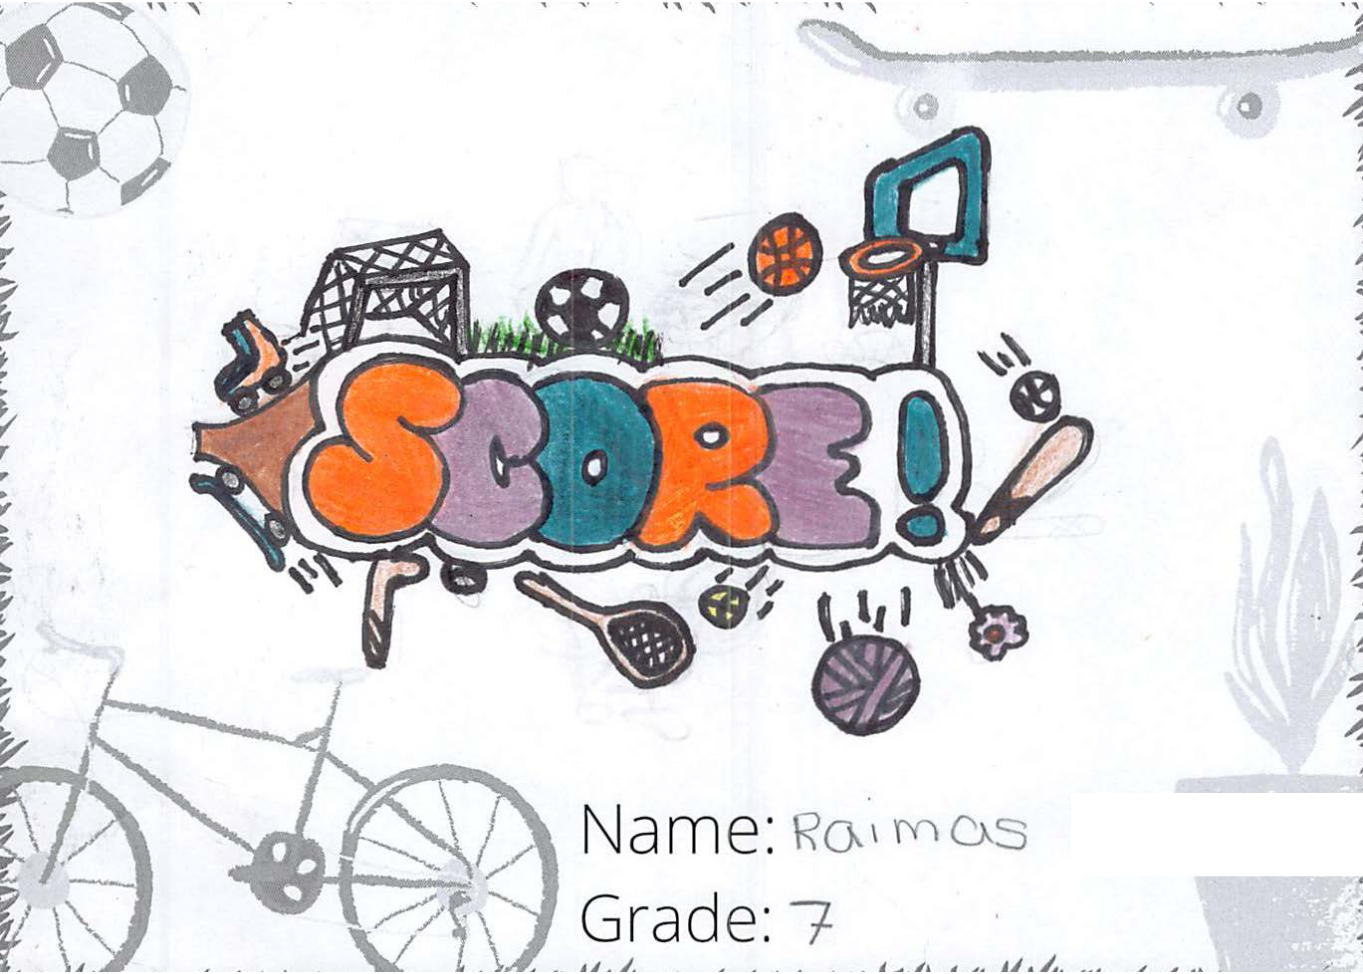 Pencil crayon drawing for the SCORE! logo contest. The drawing includes many sports and physical activities.